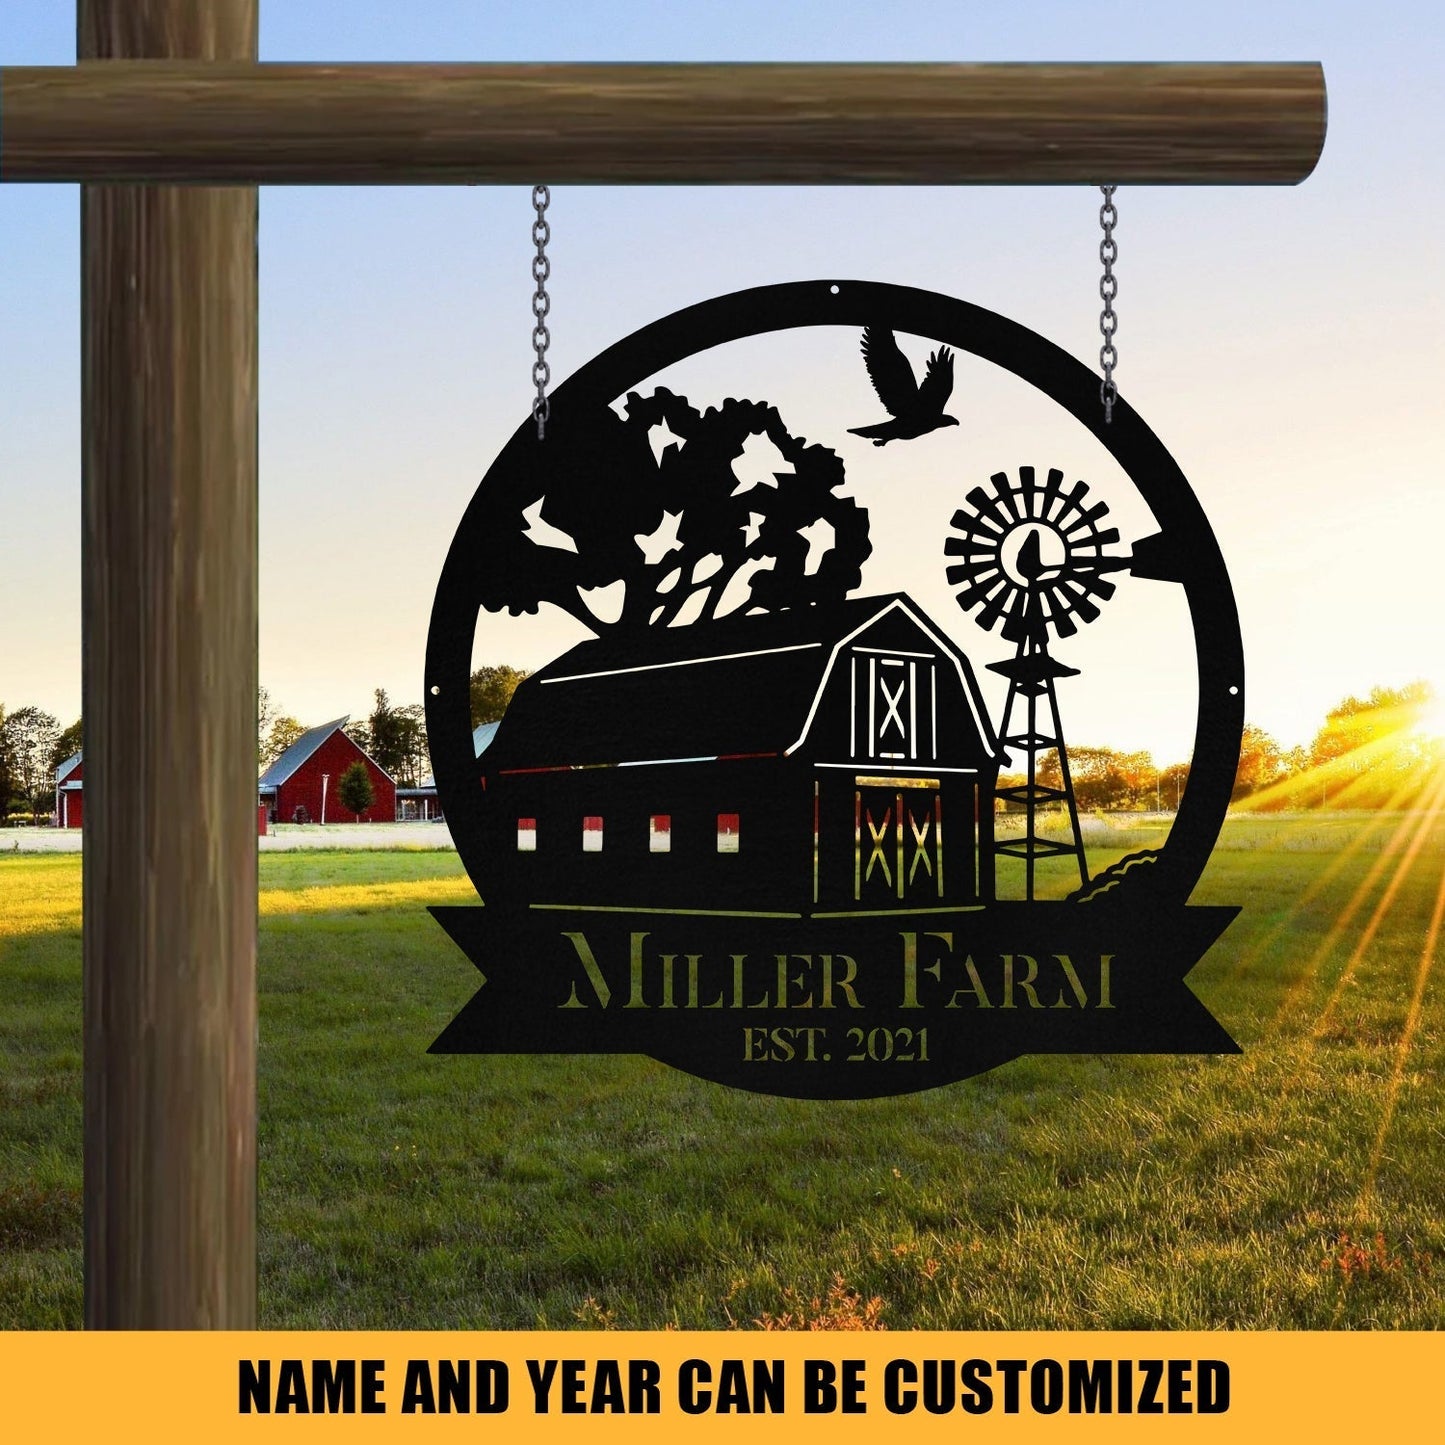 Personalized Metal Farm Sign Barn Windmill Monogram Custom Outdoor Farmhouse Front Gate Entry Road Wall Decor Art Gift